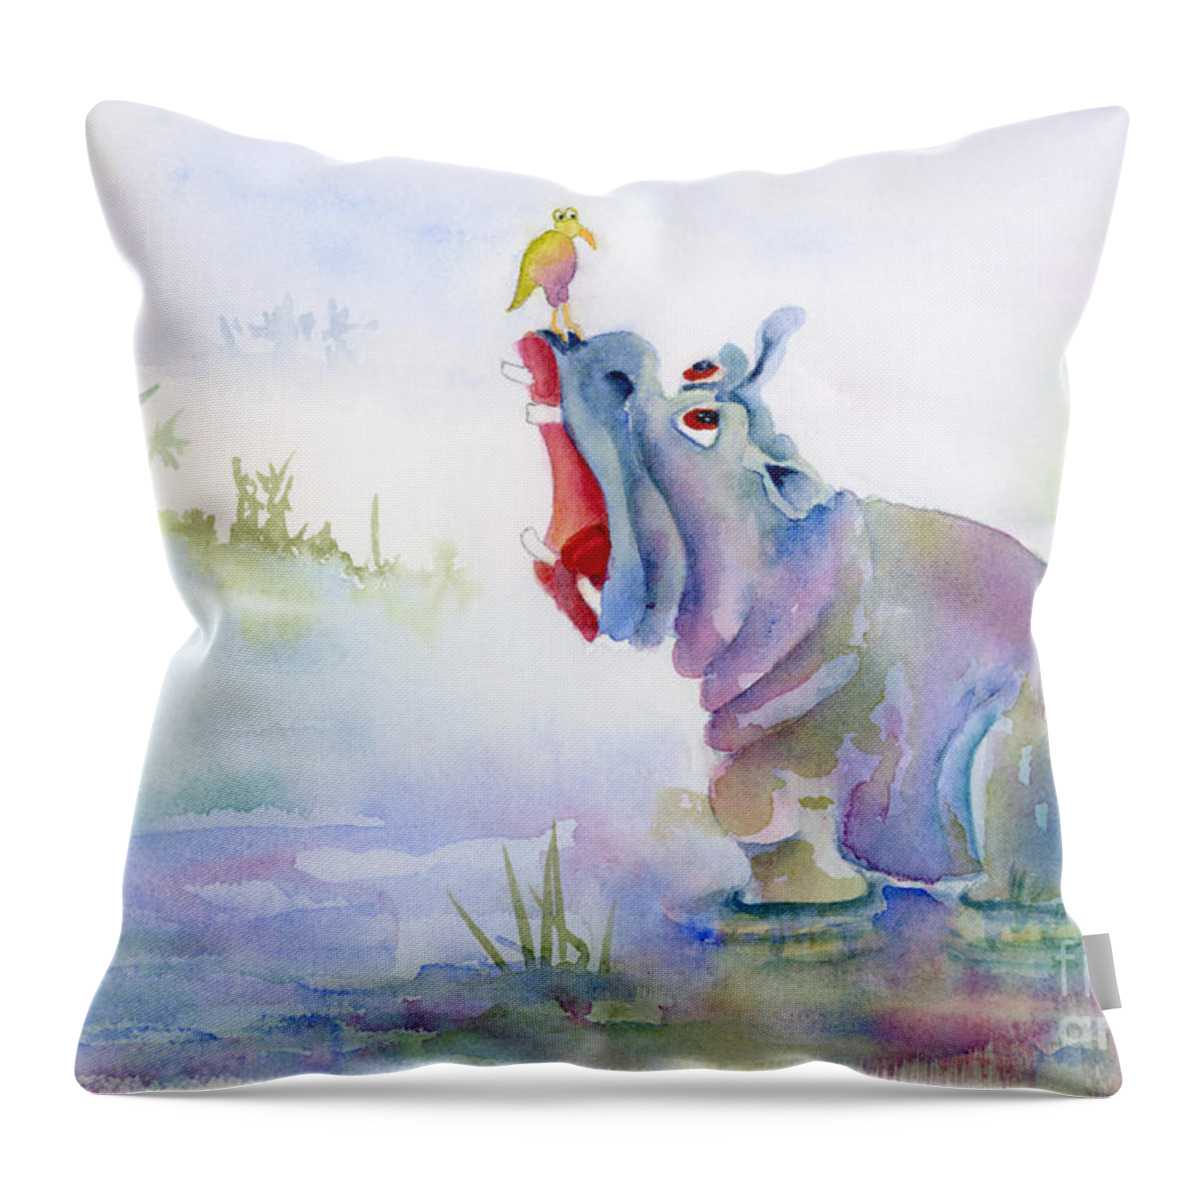 Hippo Throw Pillow featuring the painting Hey Whats the Big Idea by Amy Kirkpatrick